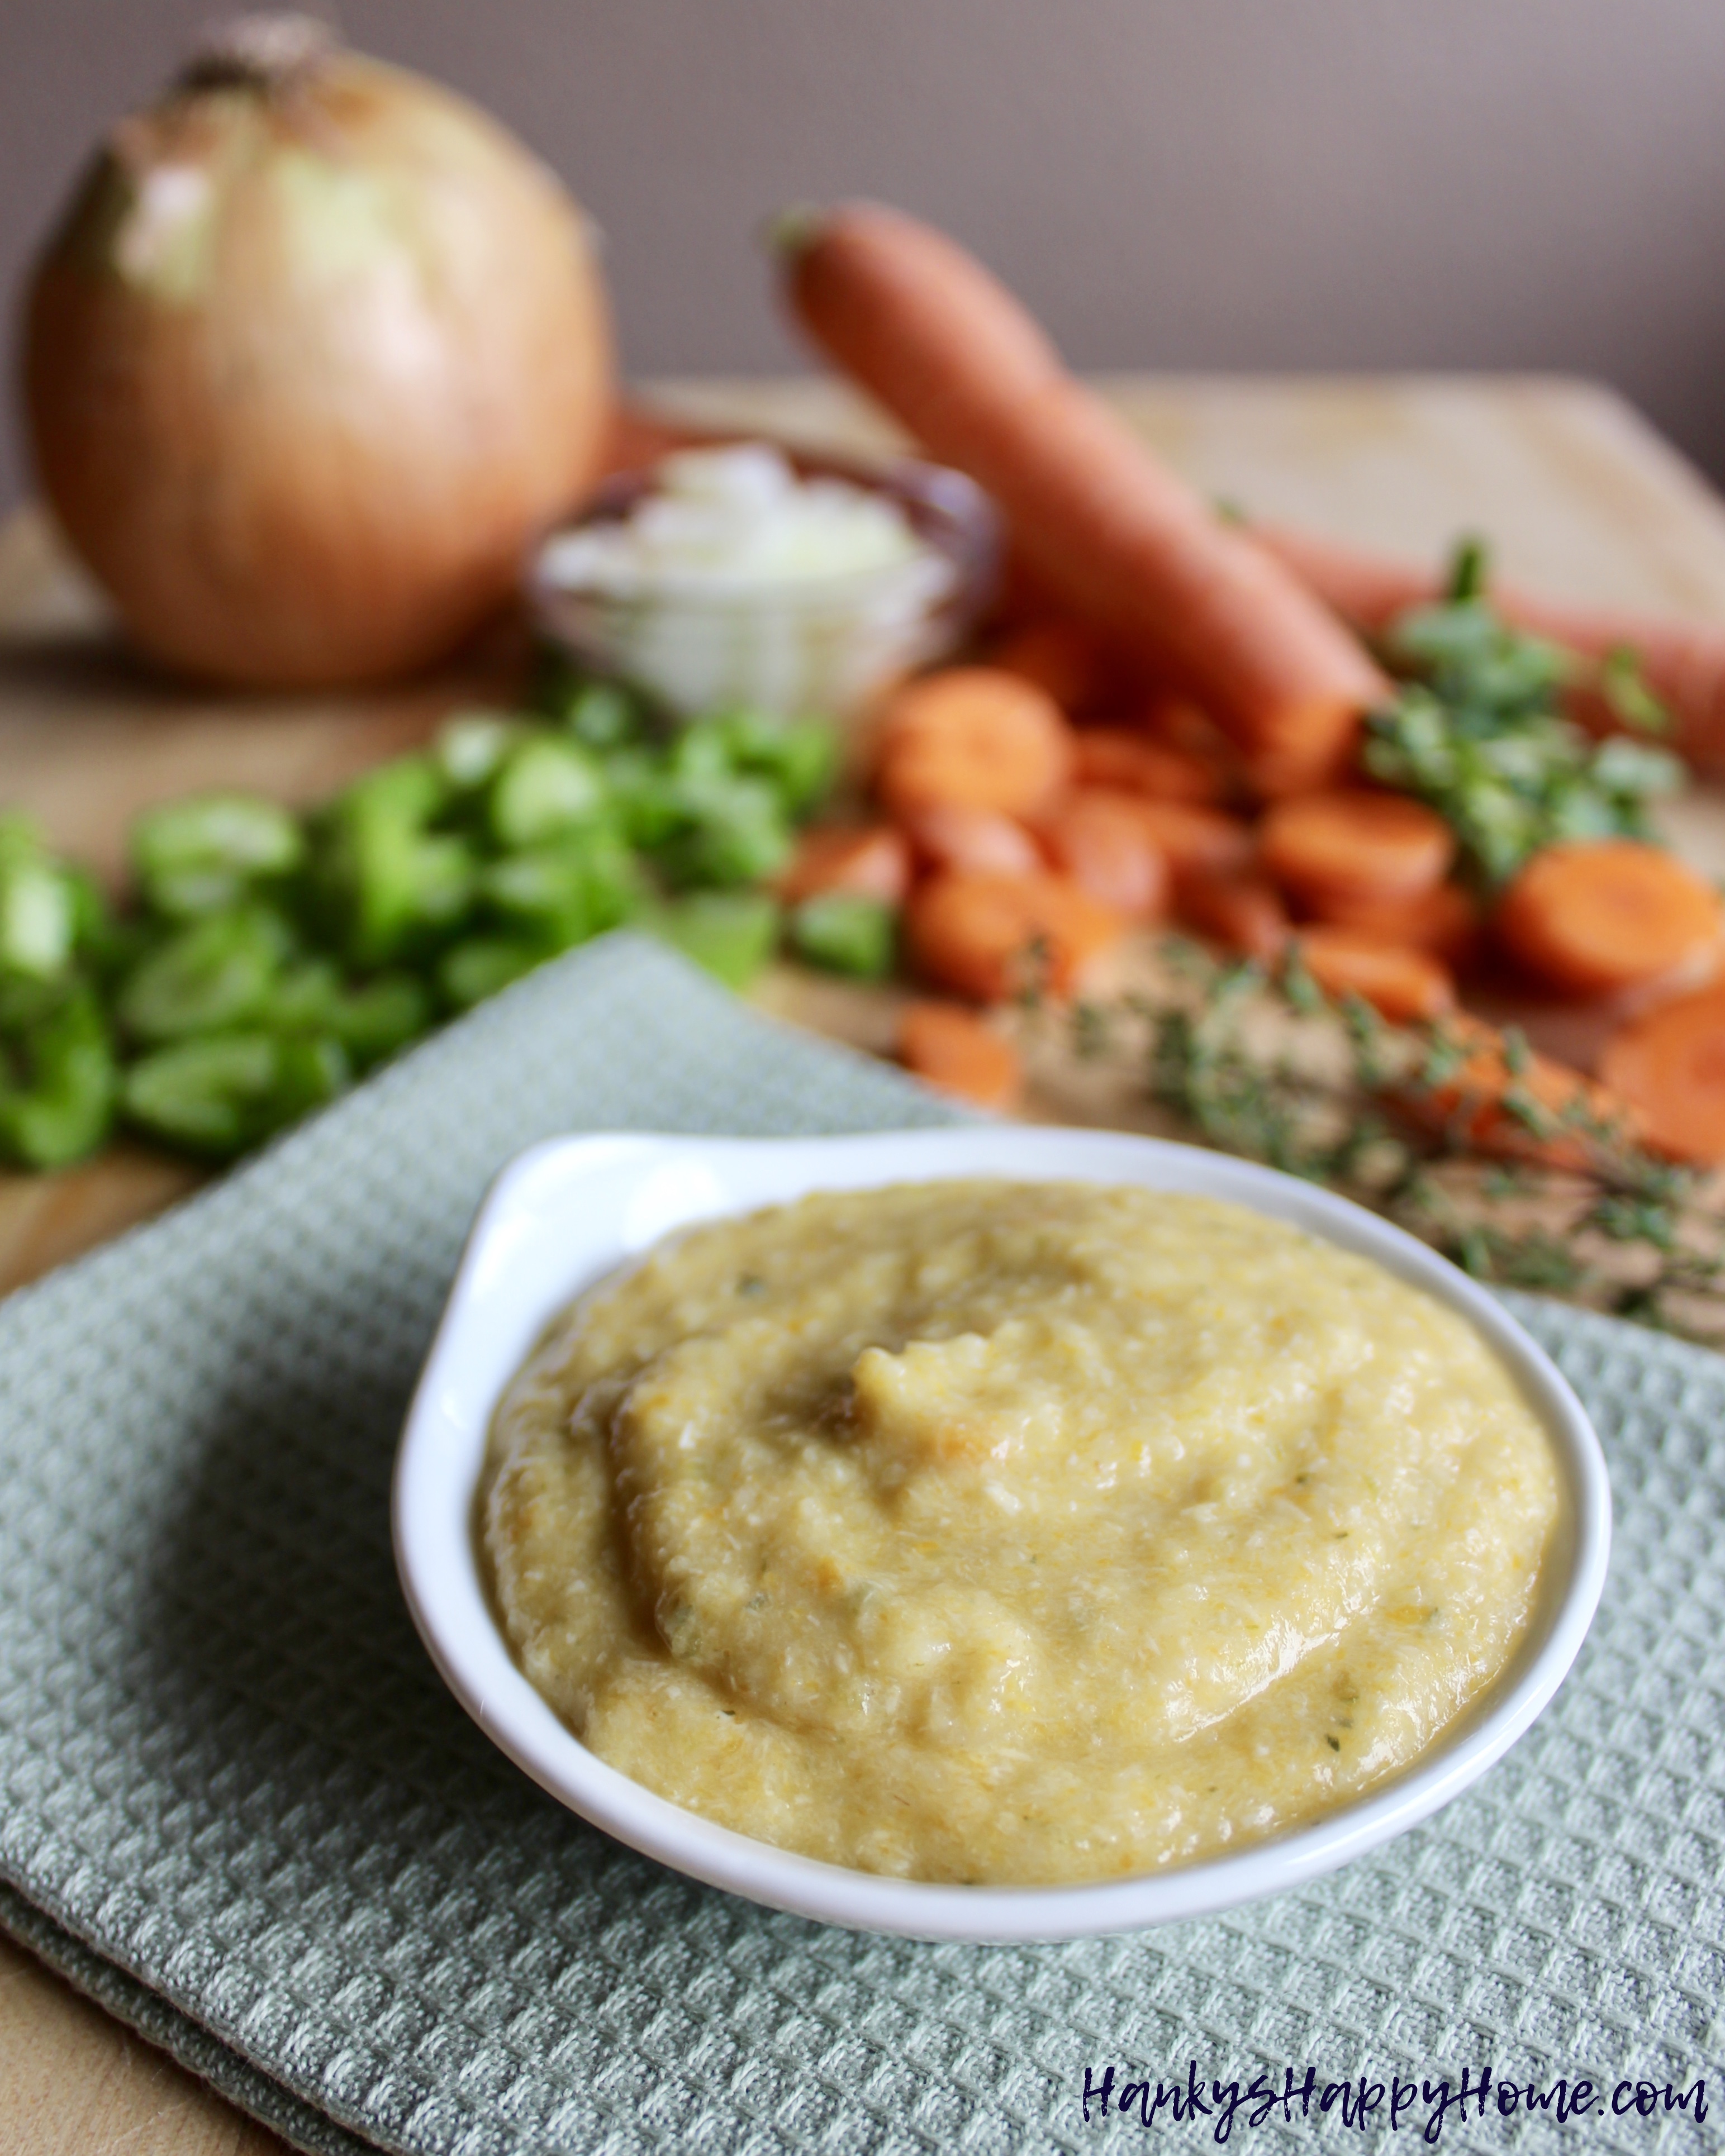 Homemade chicken noodle soup baby food makes a great finger food or puree!